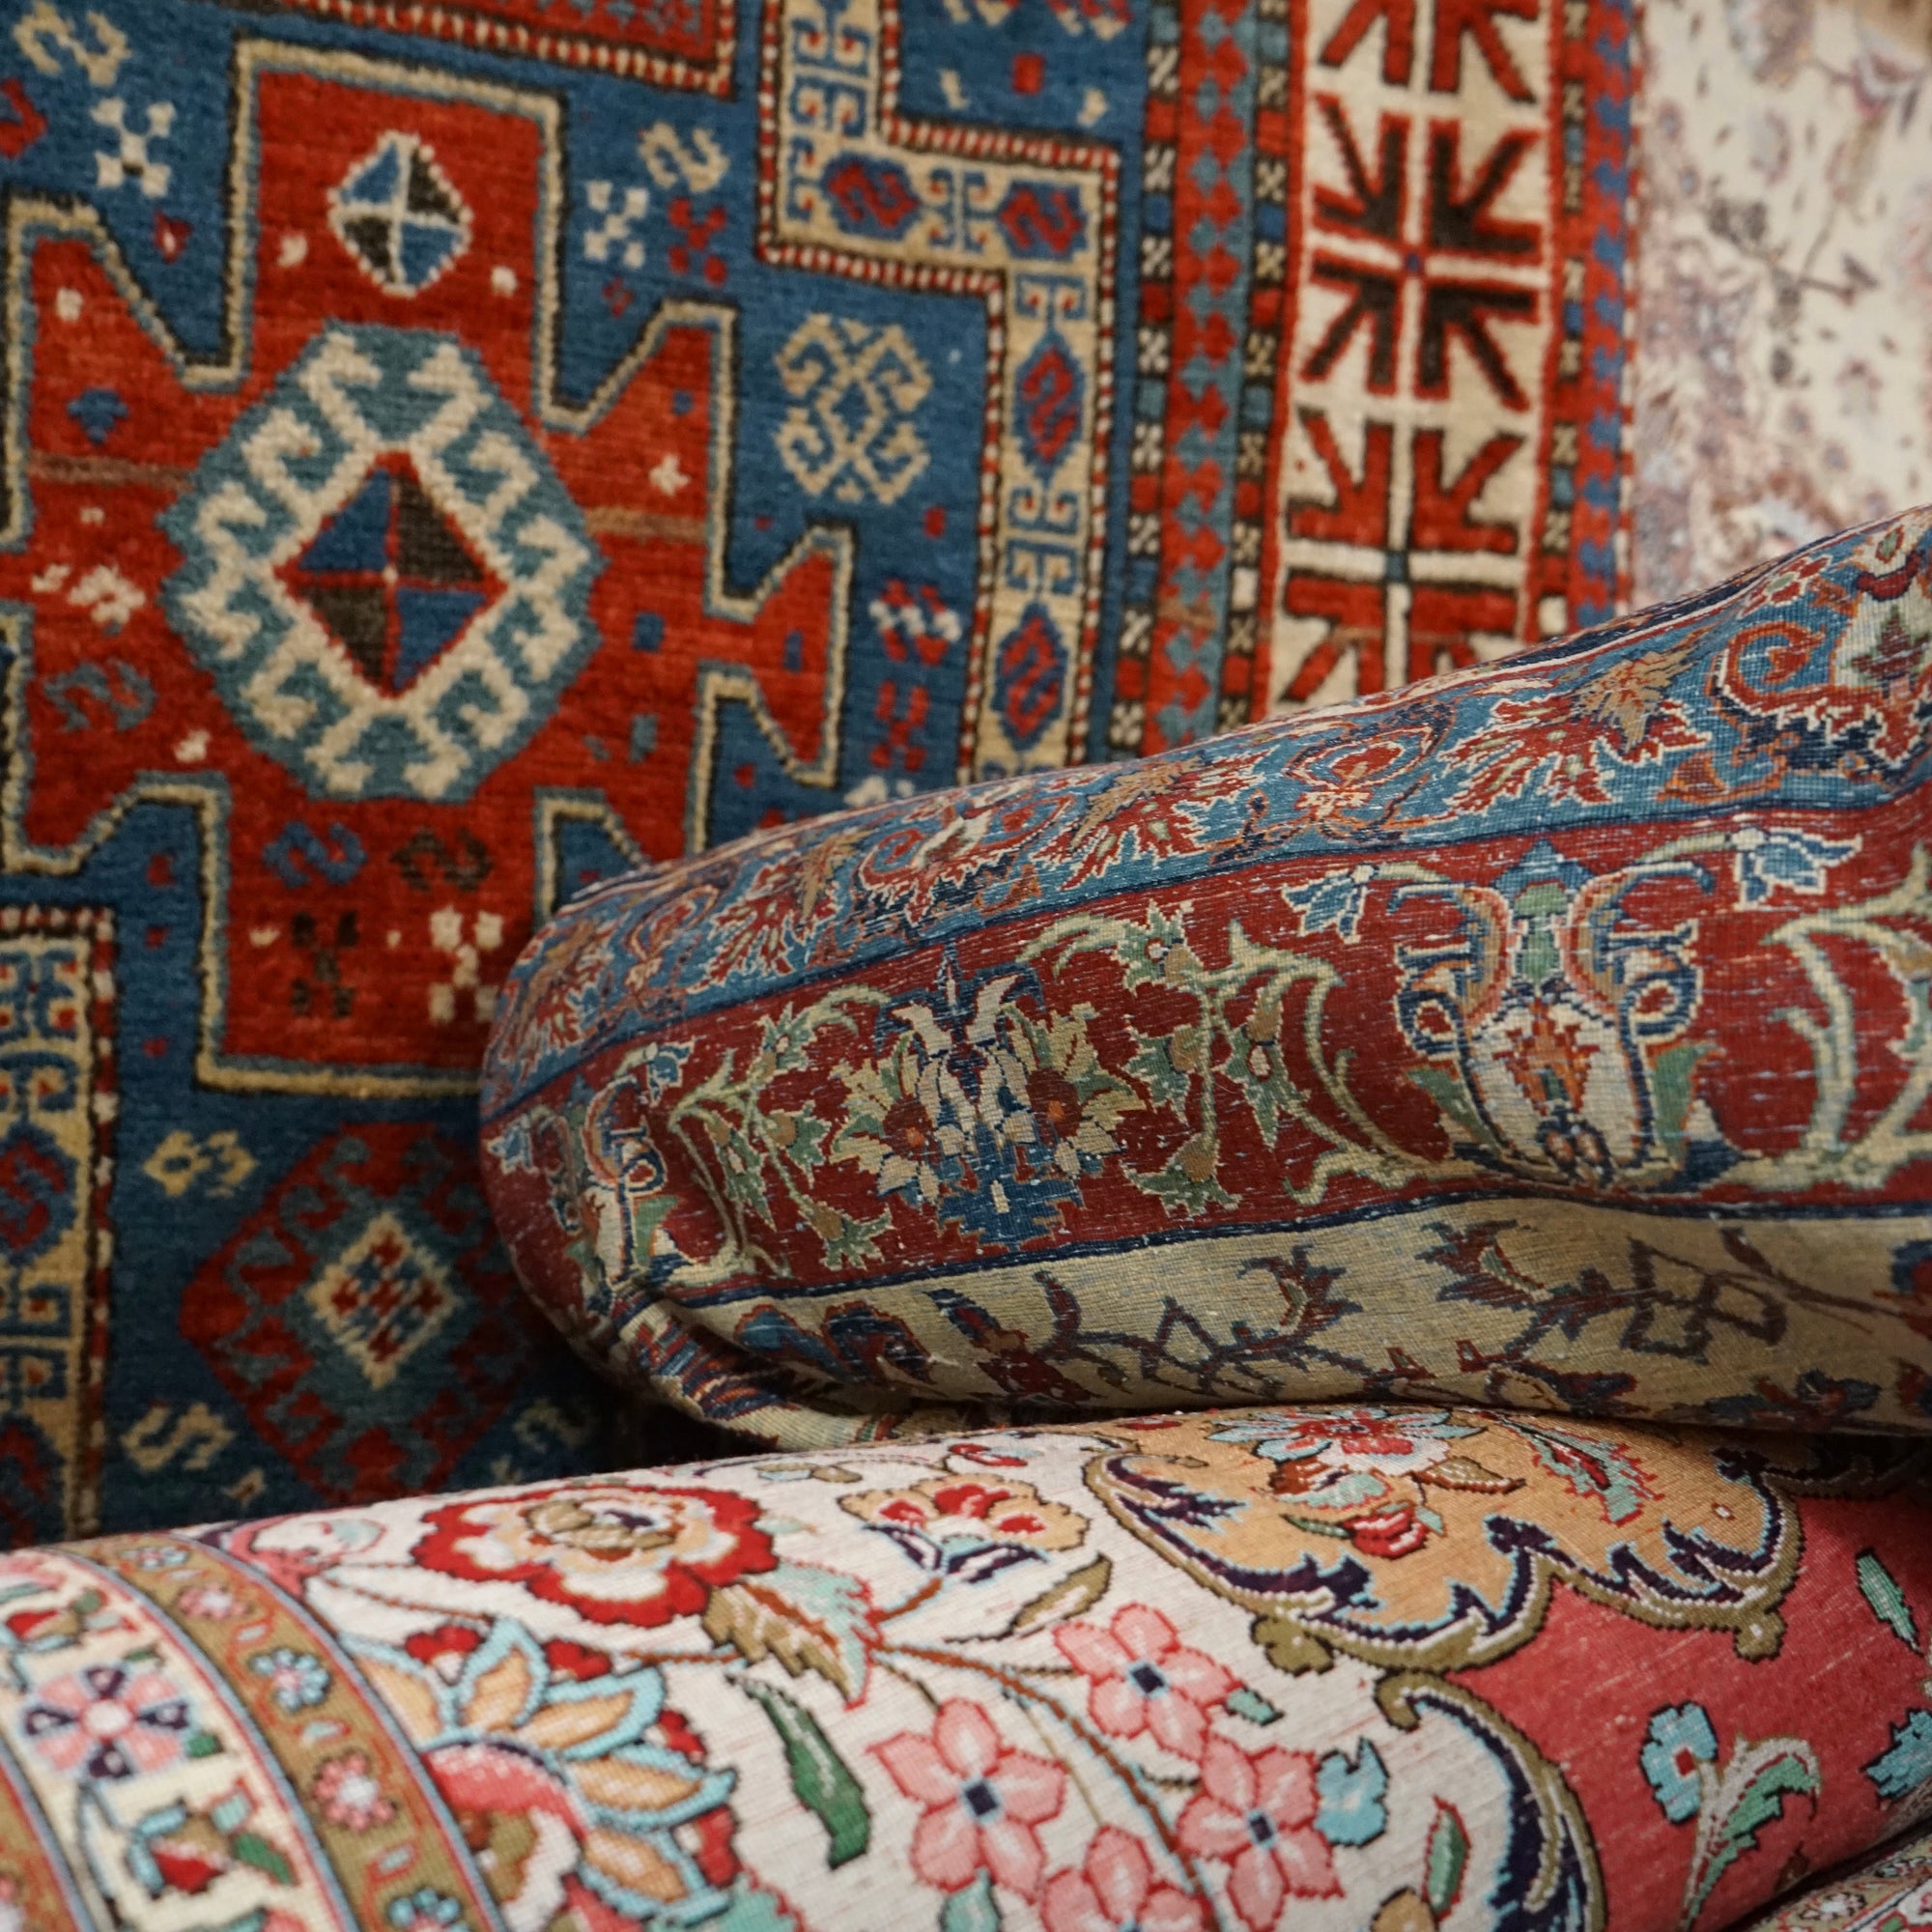 The Symbolic Meanings of Colors: Deciphering the Colors Used in Antique Rugs